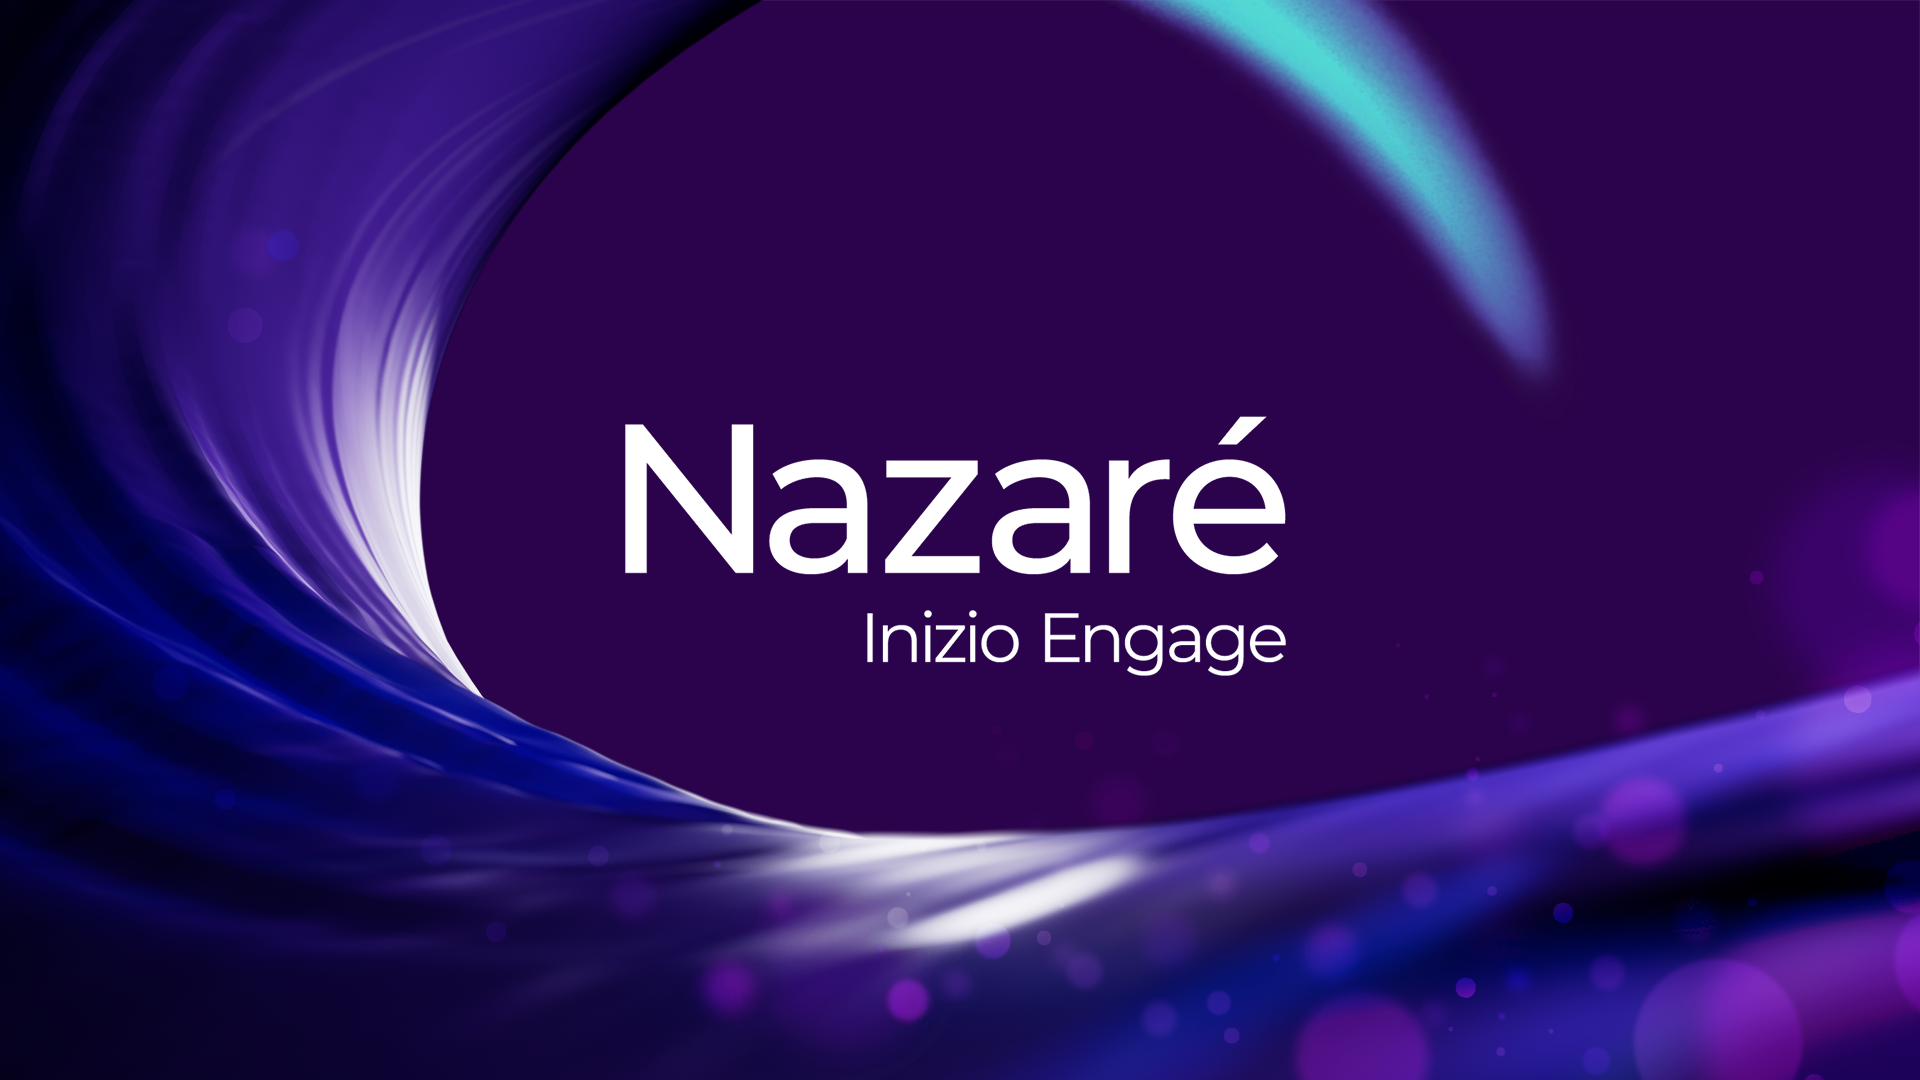 Nazaré - a new learning and capability brand